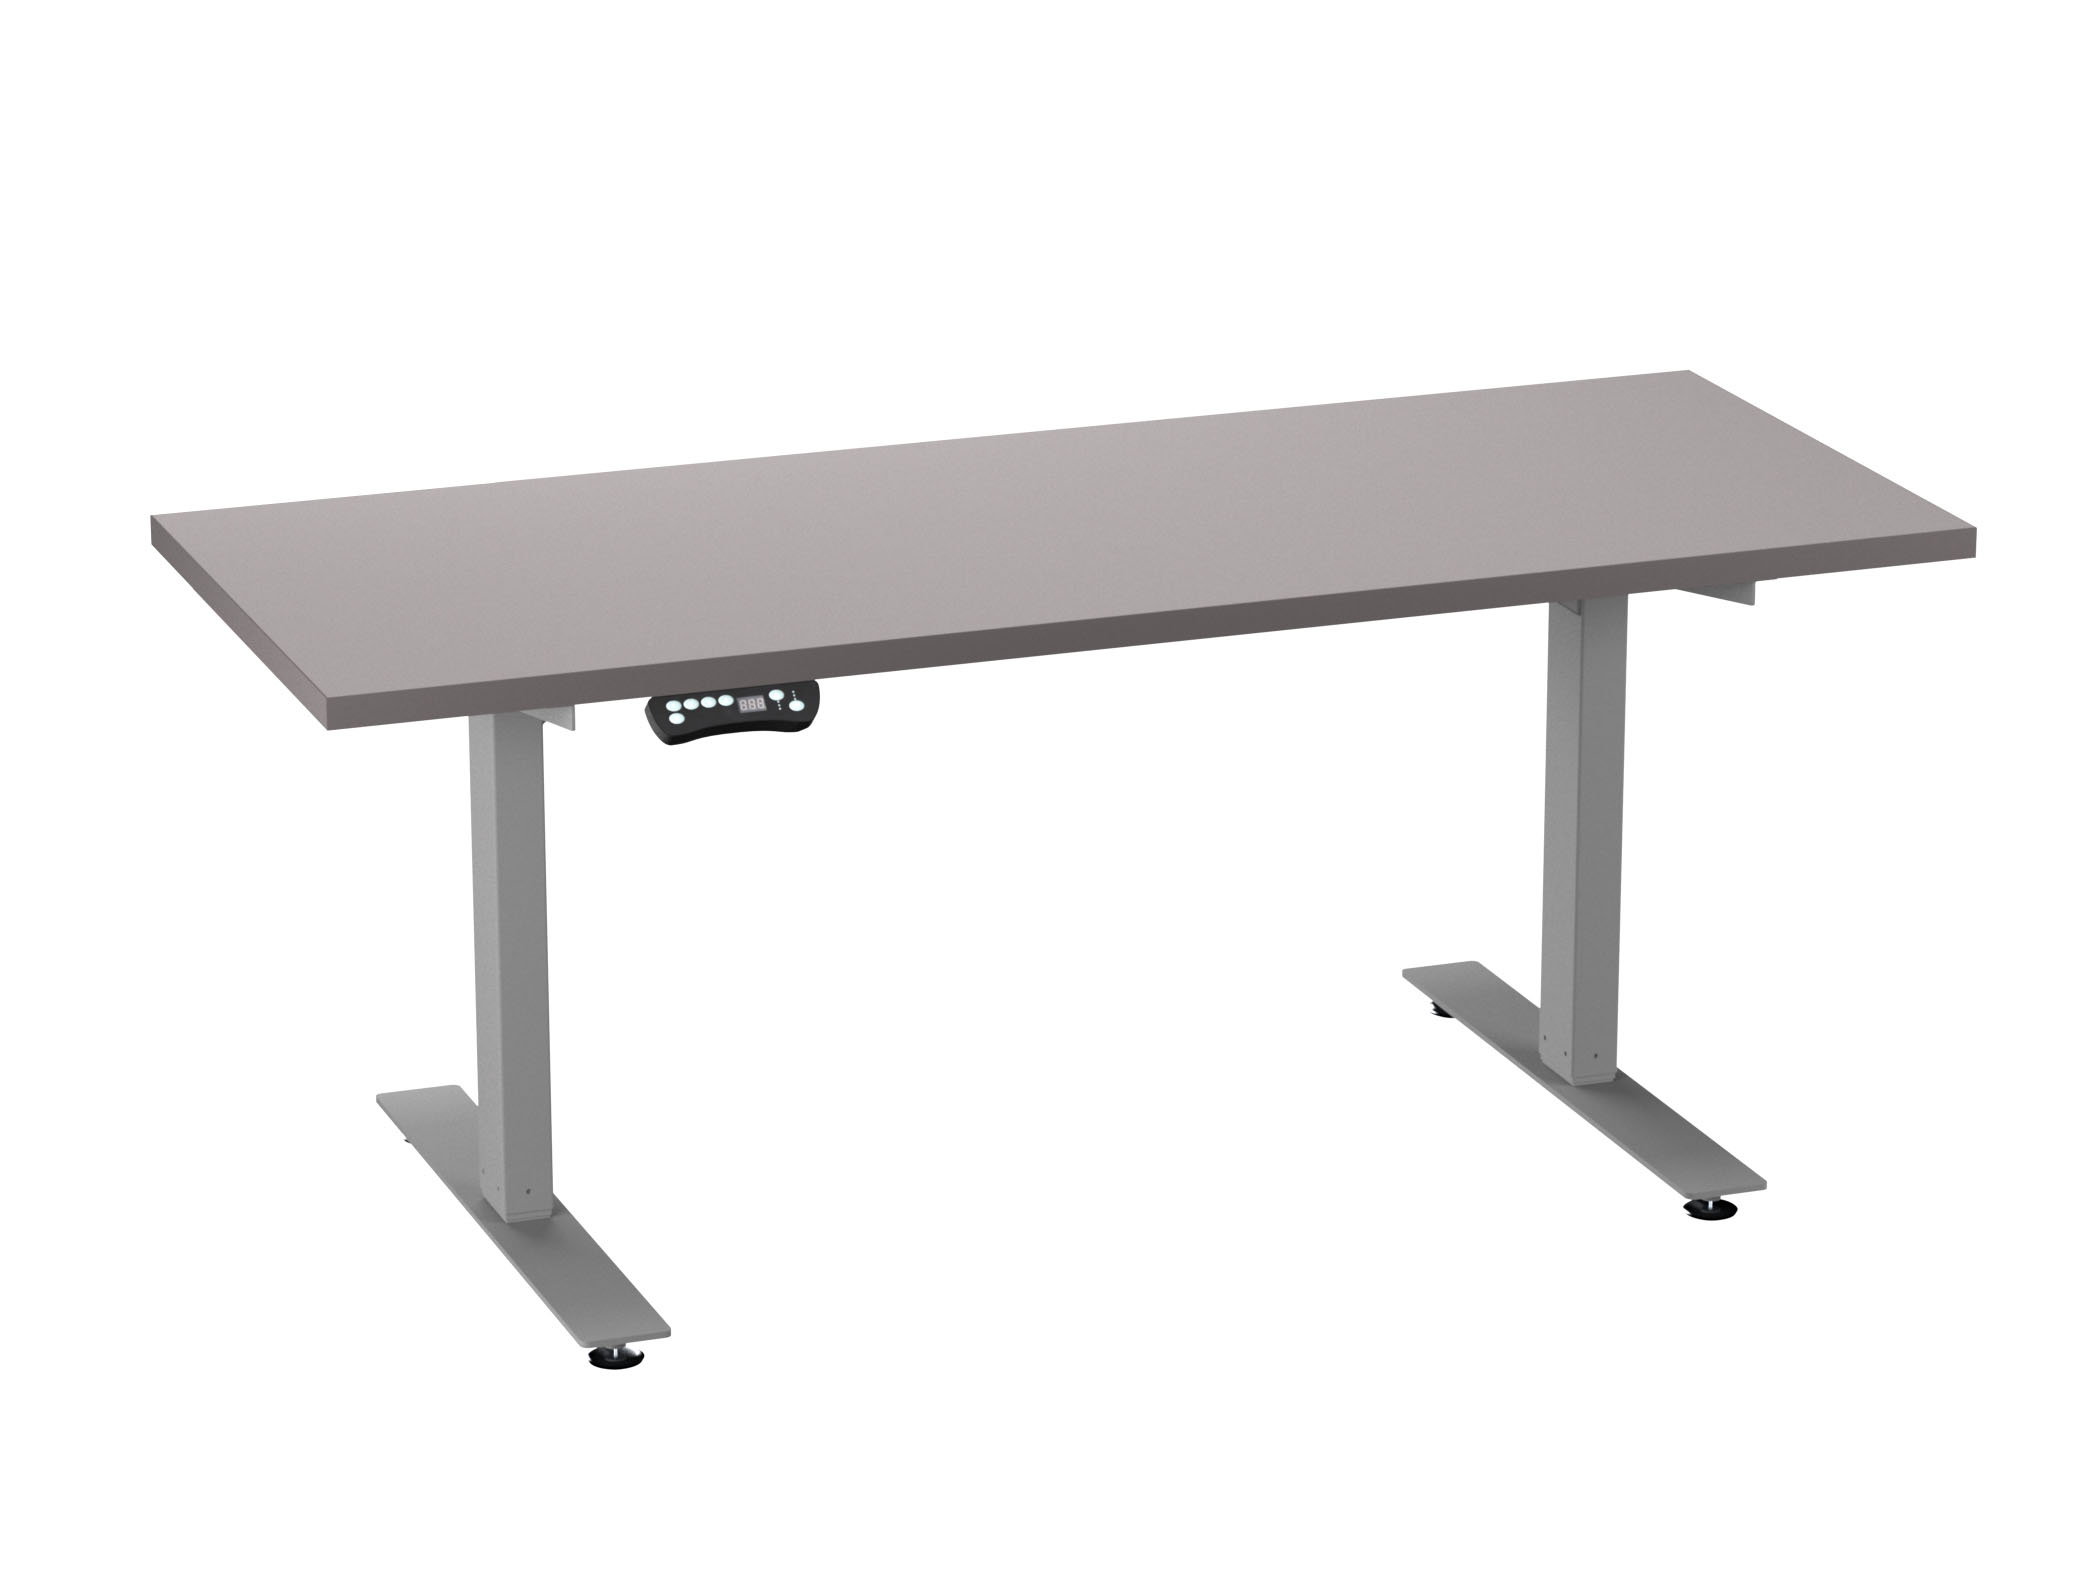 Meeting Room Furniture from Compel - HiLo adjustable table